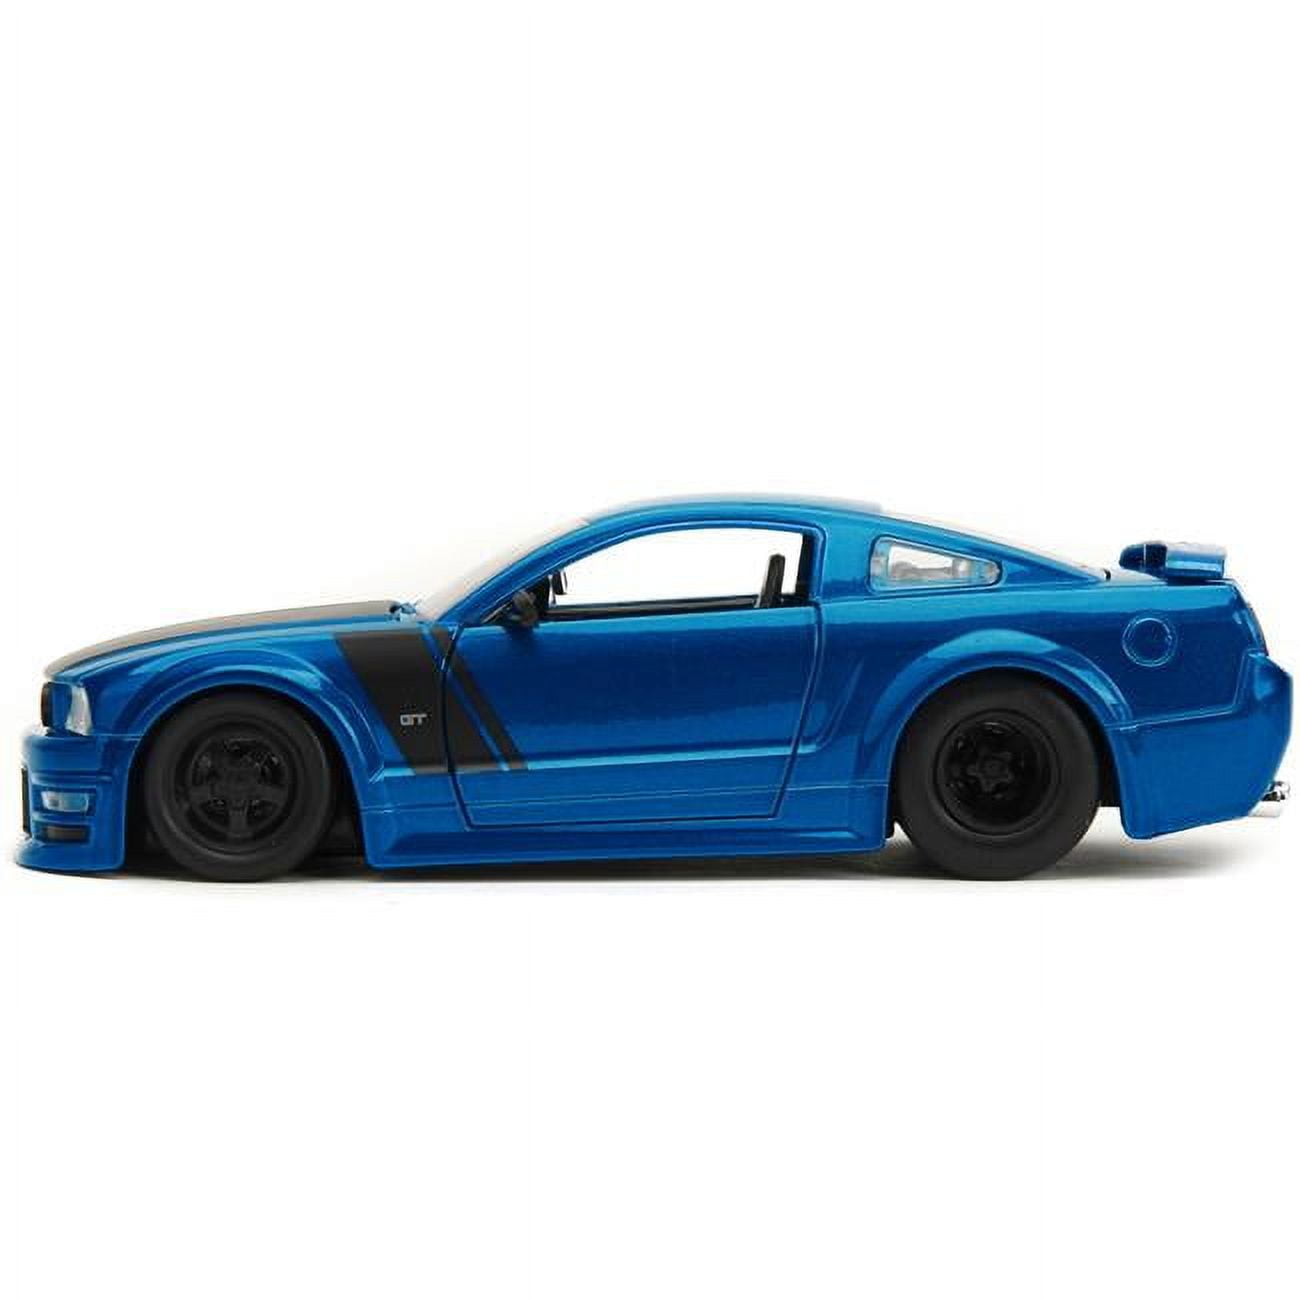 2006 Ford Mustang GT Hood & Stripes Bigtime Muscle Series 1 by 24 Scale Diecast Model Car, Blue Metallic with Matte Black -  Endless Games, EN2953180